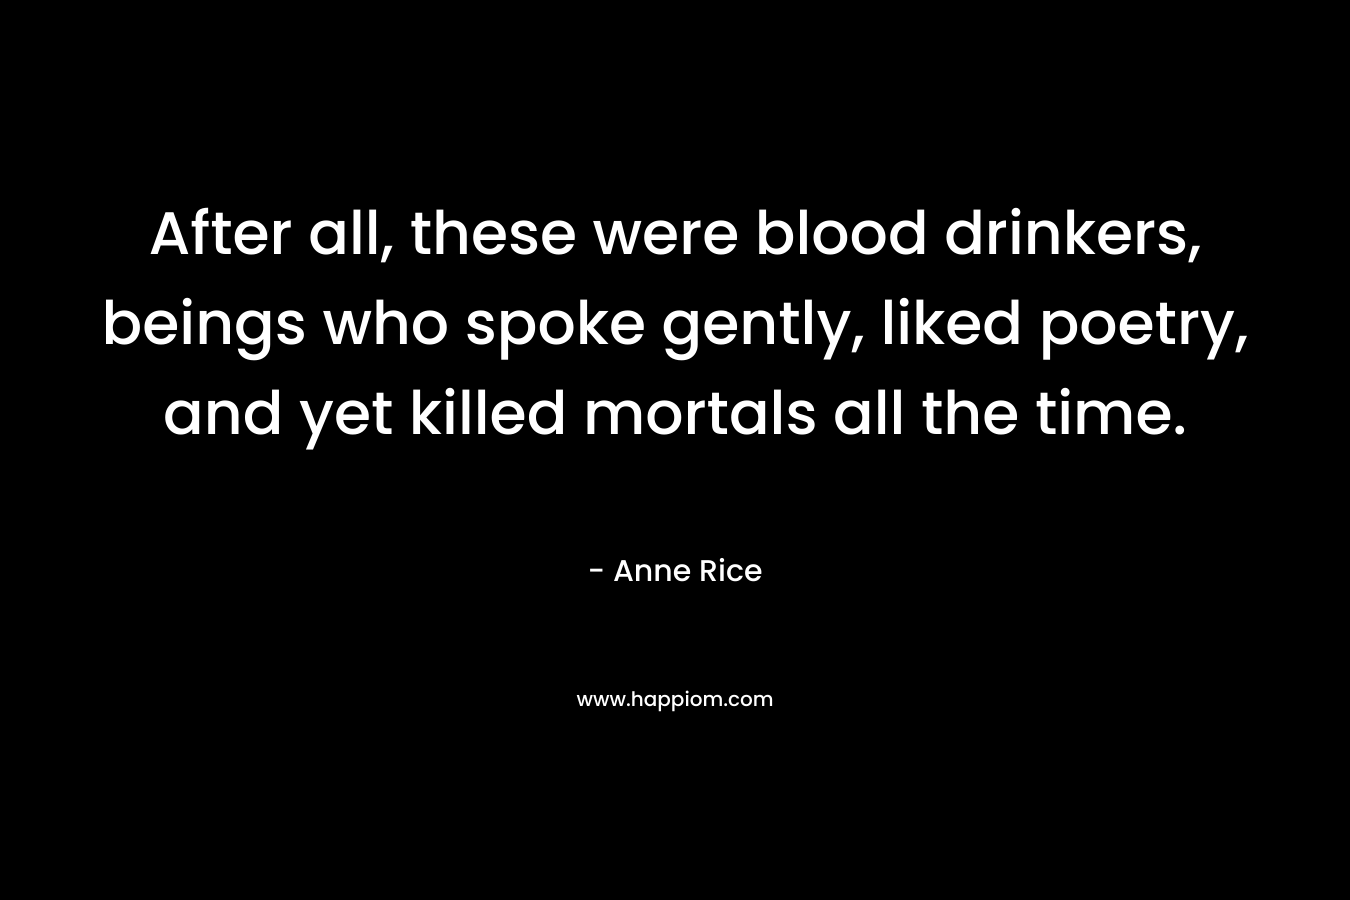 After all, these were blood drinkers, beings who spoke gently, liked poetry, and yet killed mortals all the time.